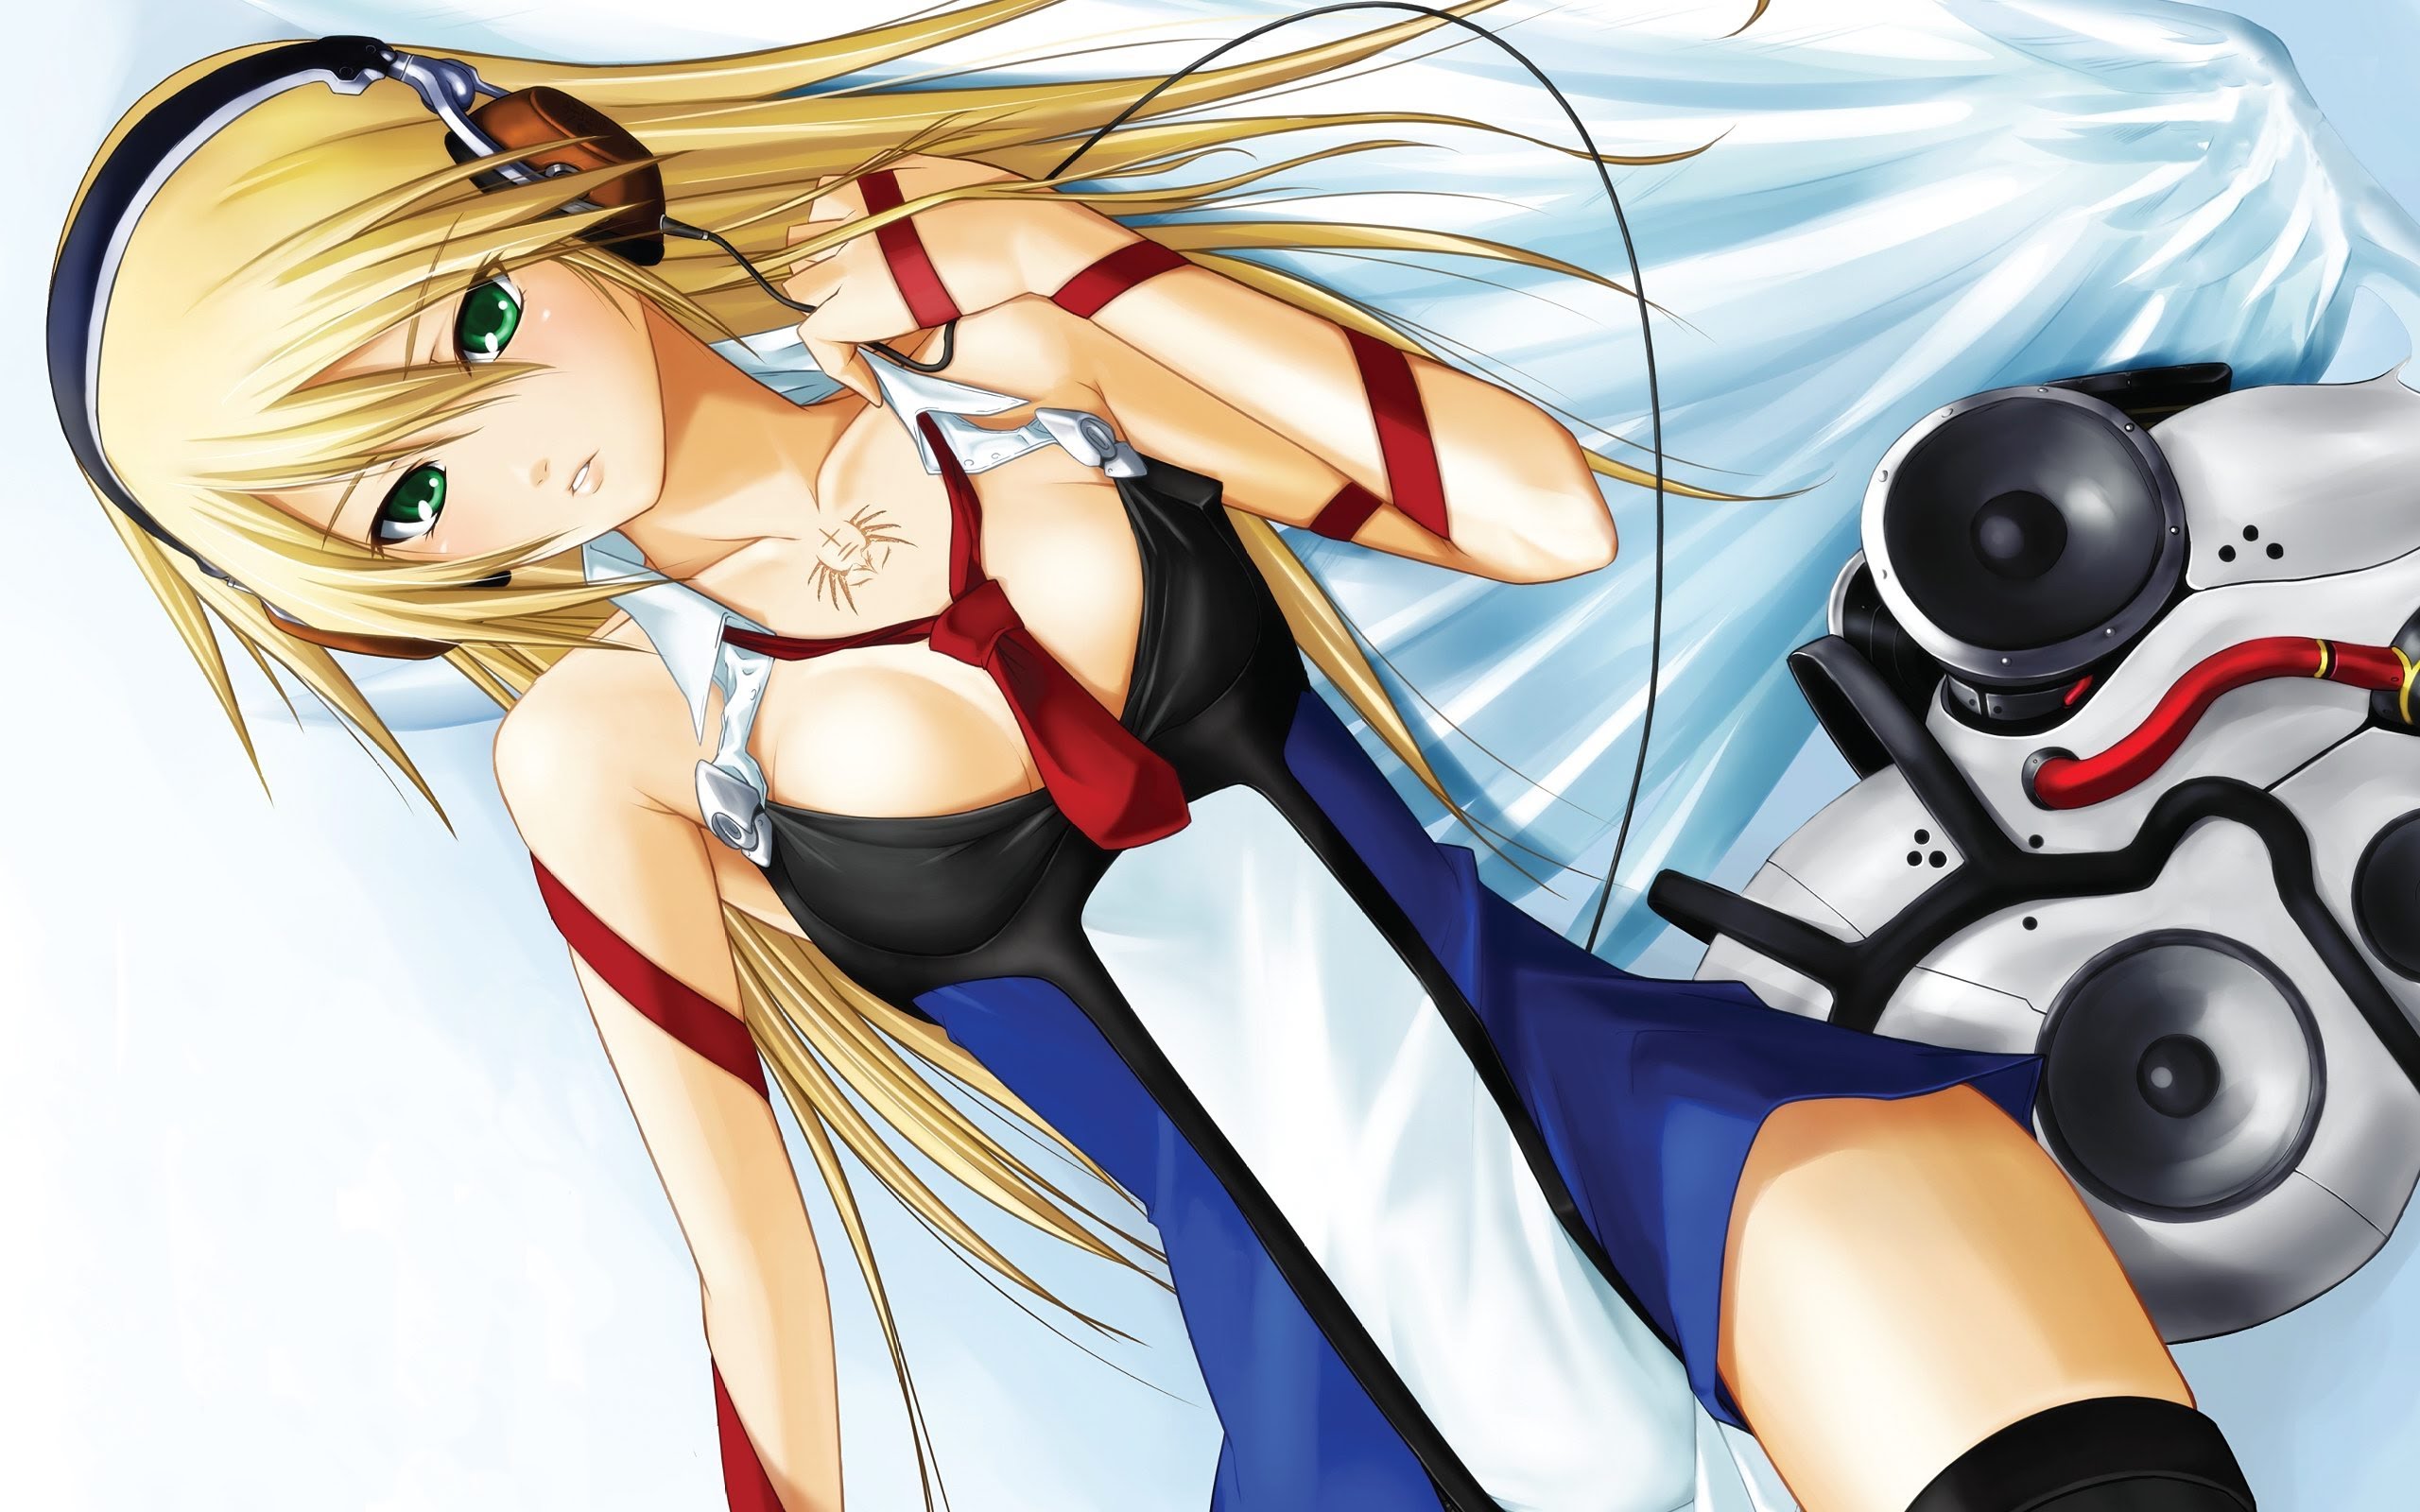 Nice wallpapers BlazBlue: Continuum Shift Extend 2560x1600px